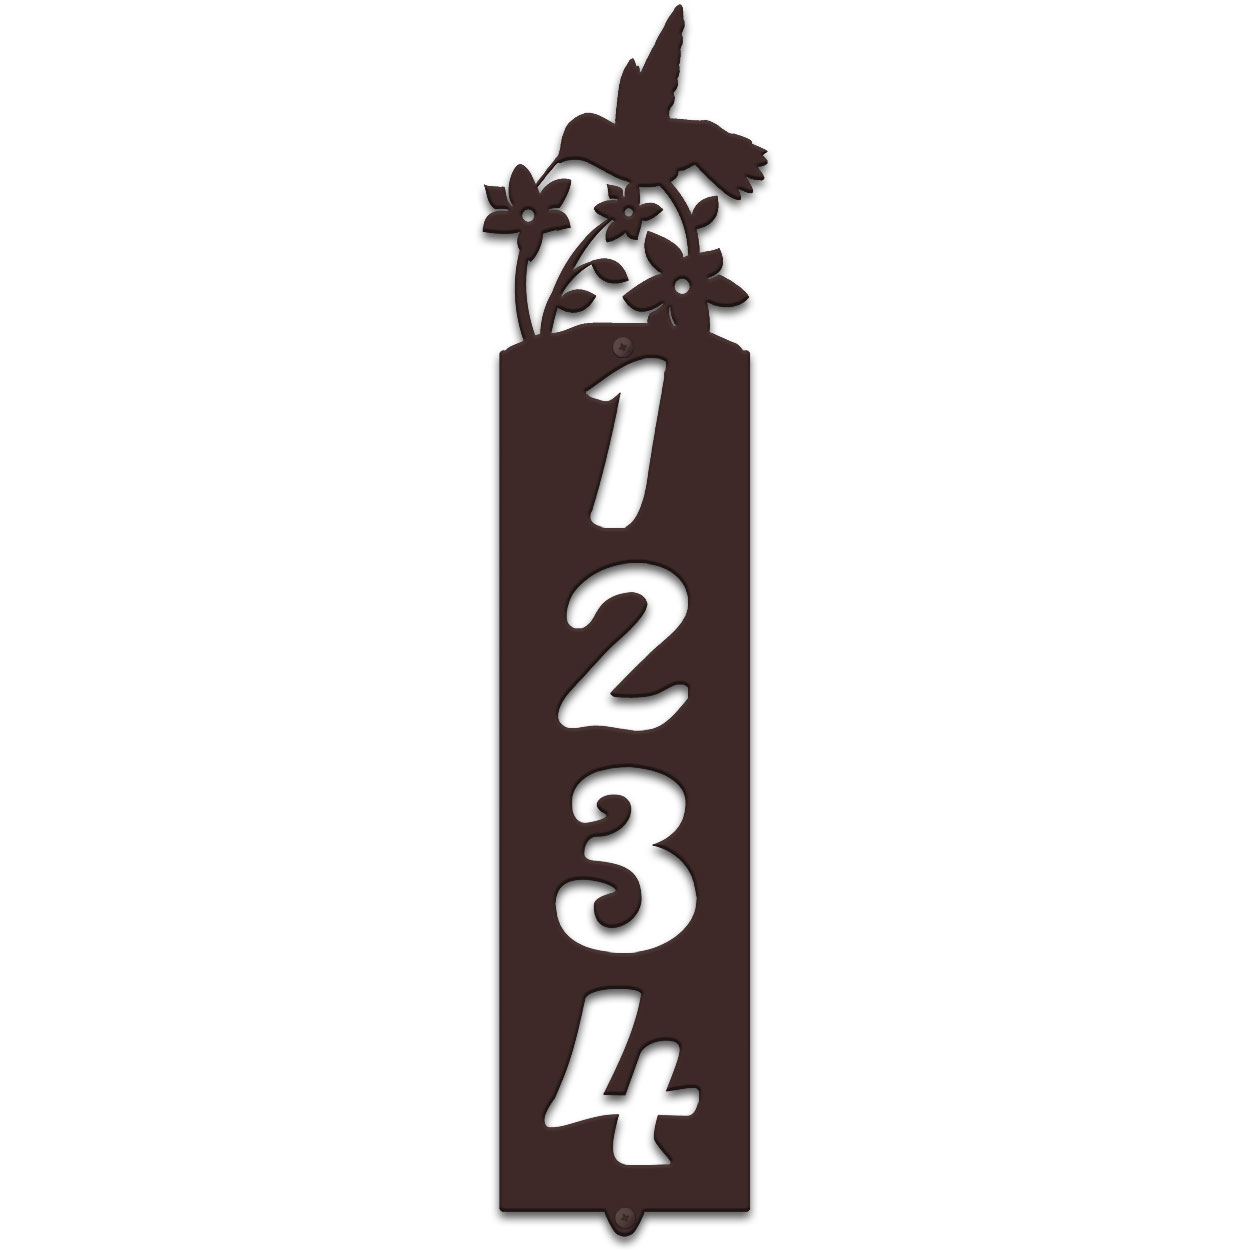 635354 - Hummingbird Cut Outs Four Digit Address Number Plaque